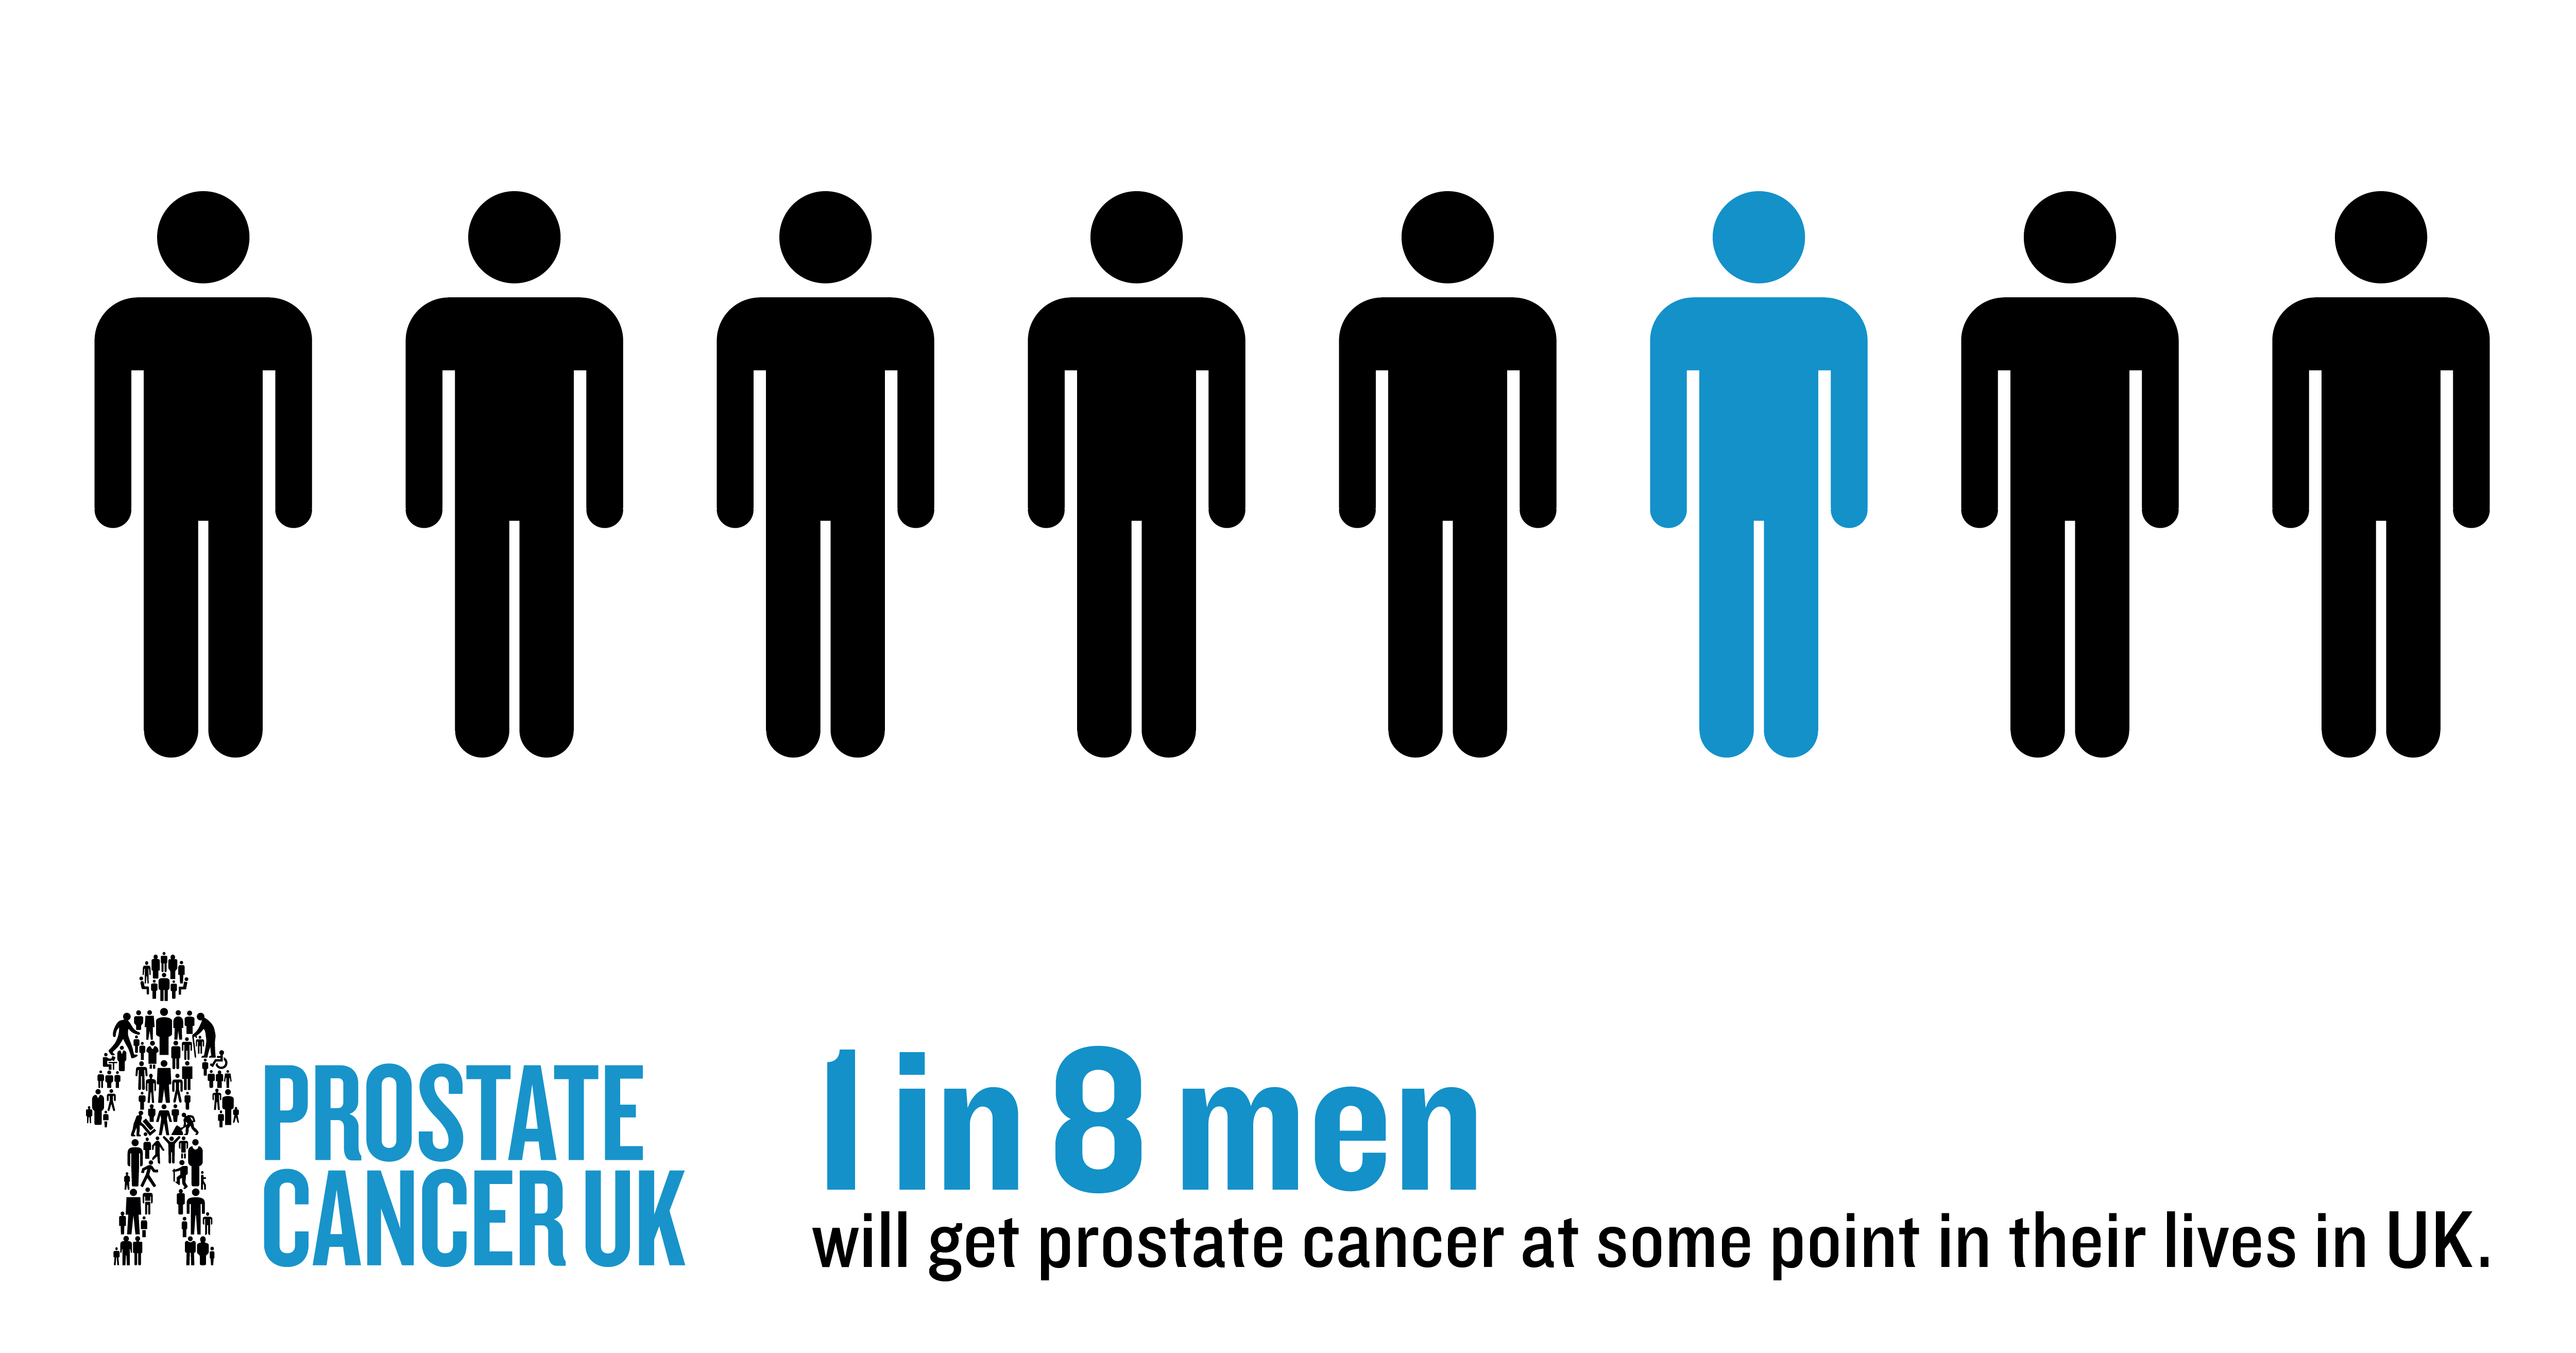 Infographic - 1 in 8 men will get prostate cancer in their lives in the UK.